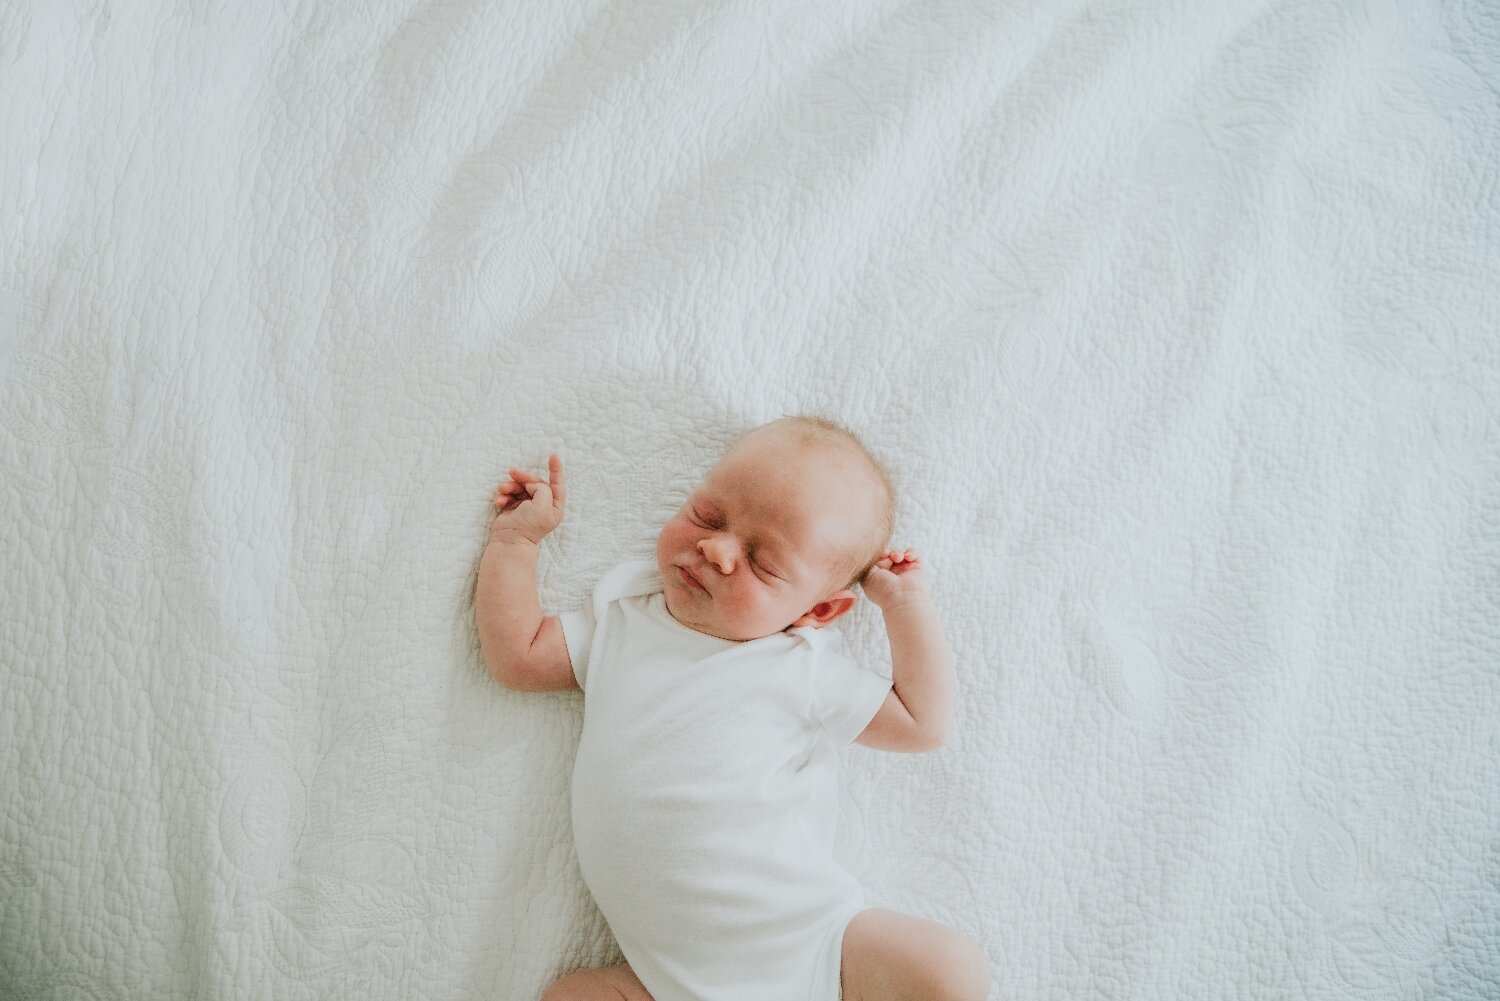 Image-Of-Newborn-Stretching-In-Parents-Bed